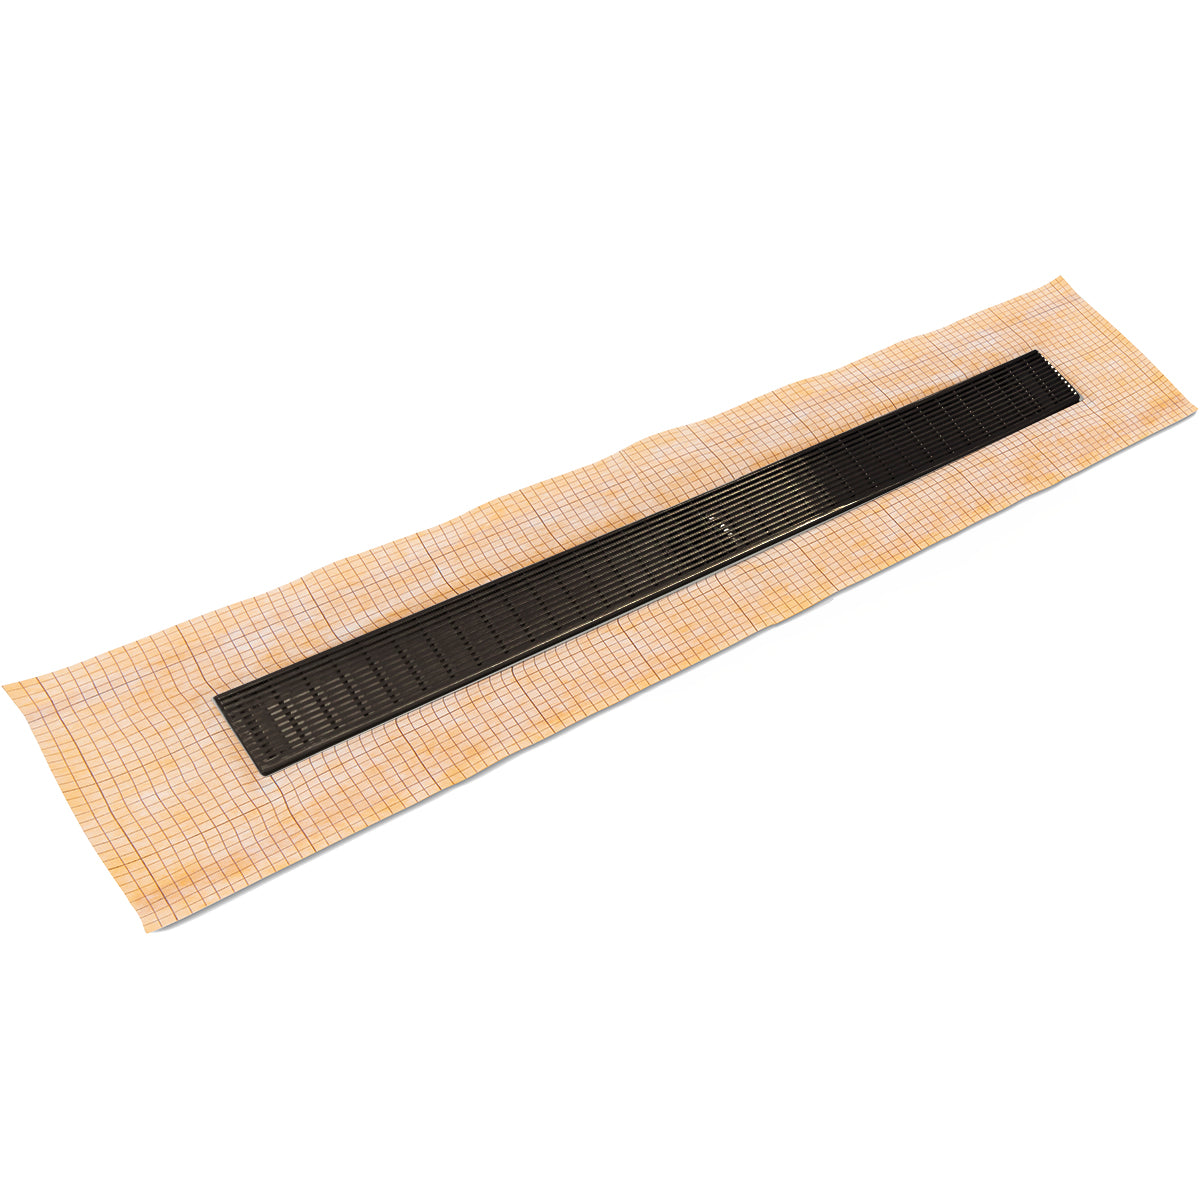 Infinity Drain 36" FCS Series Schluter-Kerdi - Fixed Flange Linear Drain Kit with 2 1/2" Wedge Wire Grate